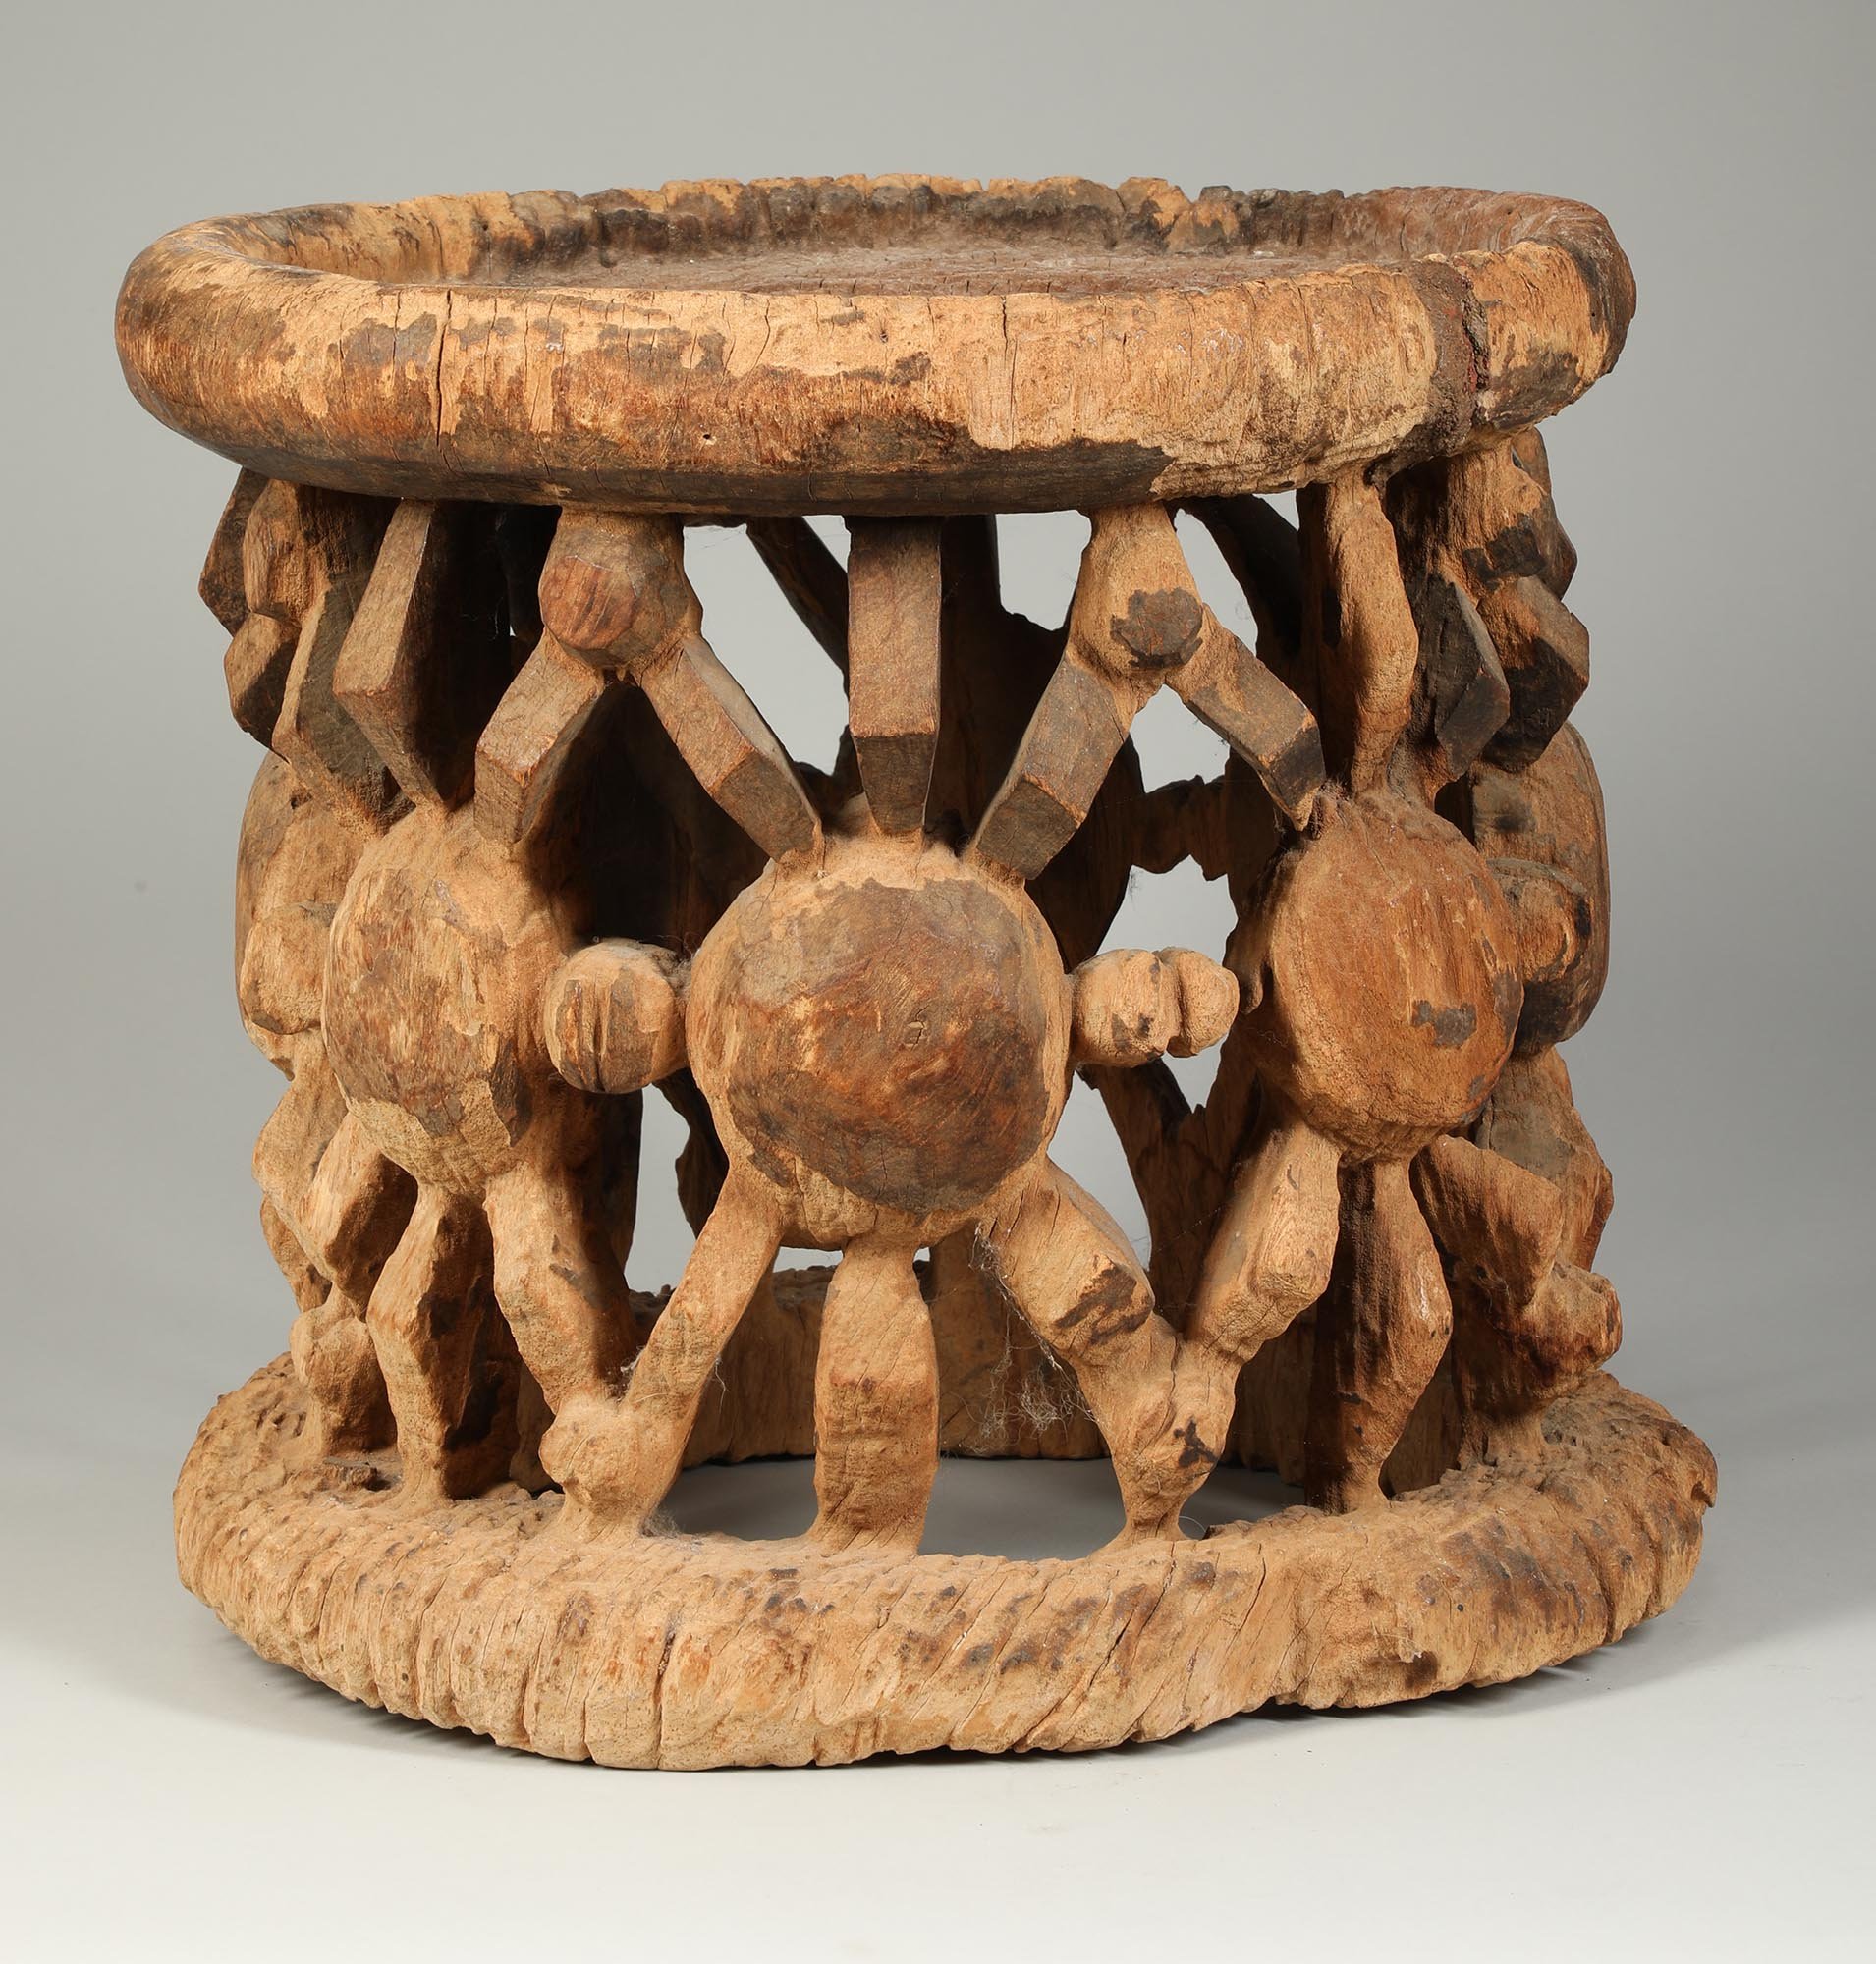 Early Cameroon Stool with Spiders